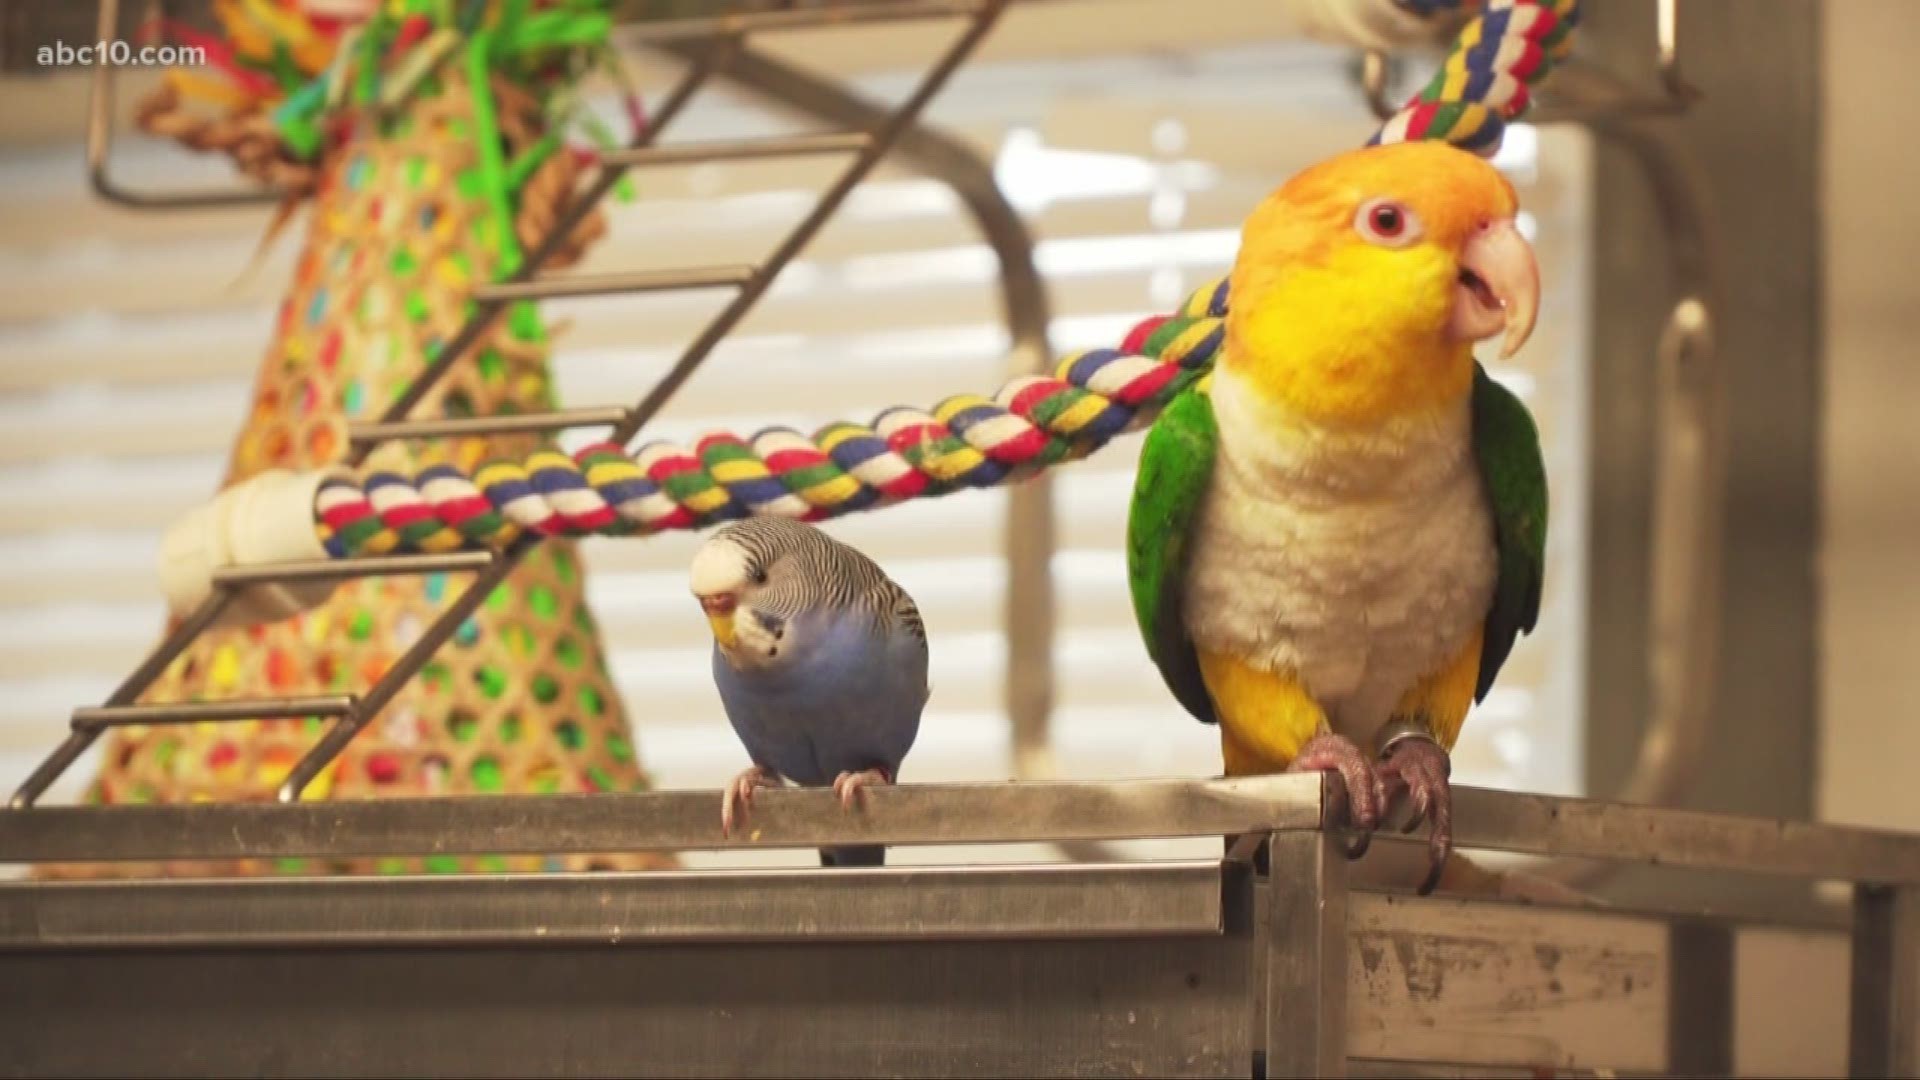 Kyle Trambley and his parrot, Inca, were just hanging out at Drake's The Barn. Then, they met an unlikely friend in need of help.